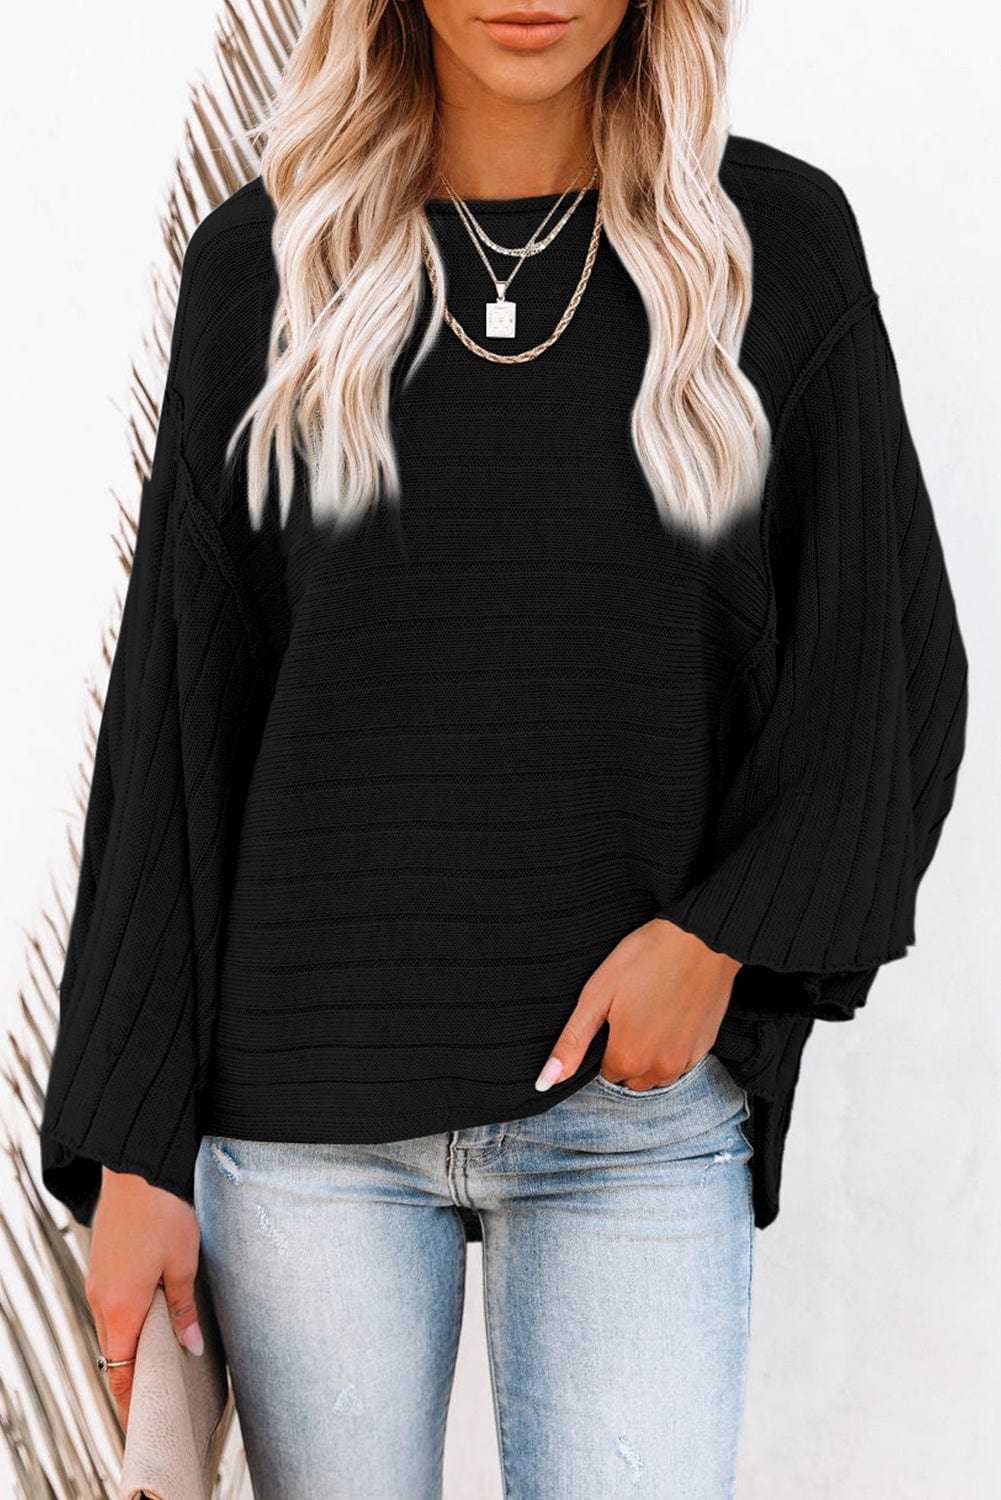 The802Gypsy  shirts and tops Black / S TRAVELING GYPSY-Exposed Seam Knit Casual Top